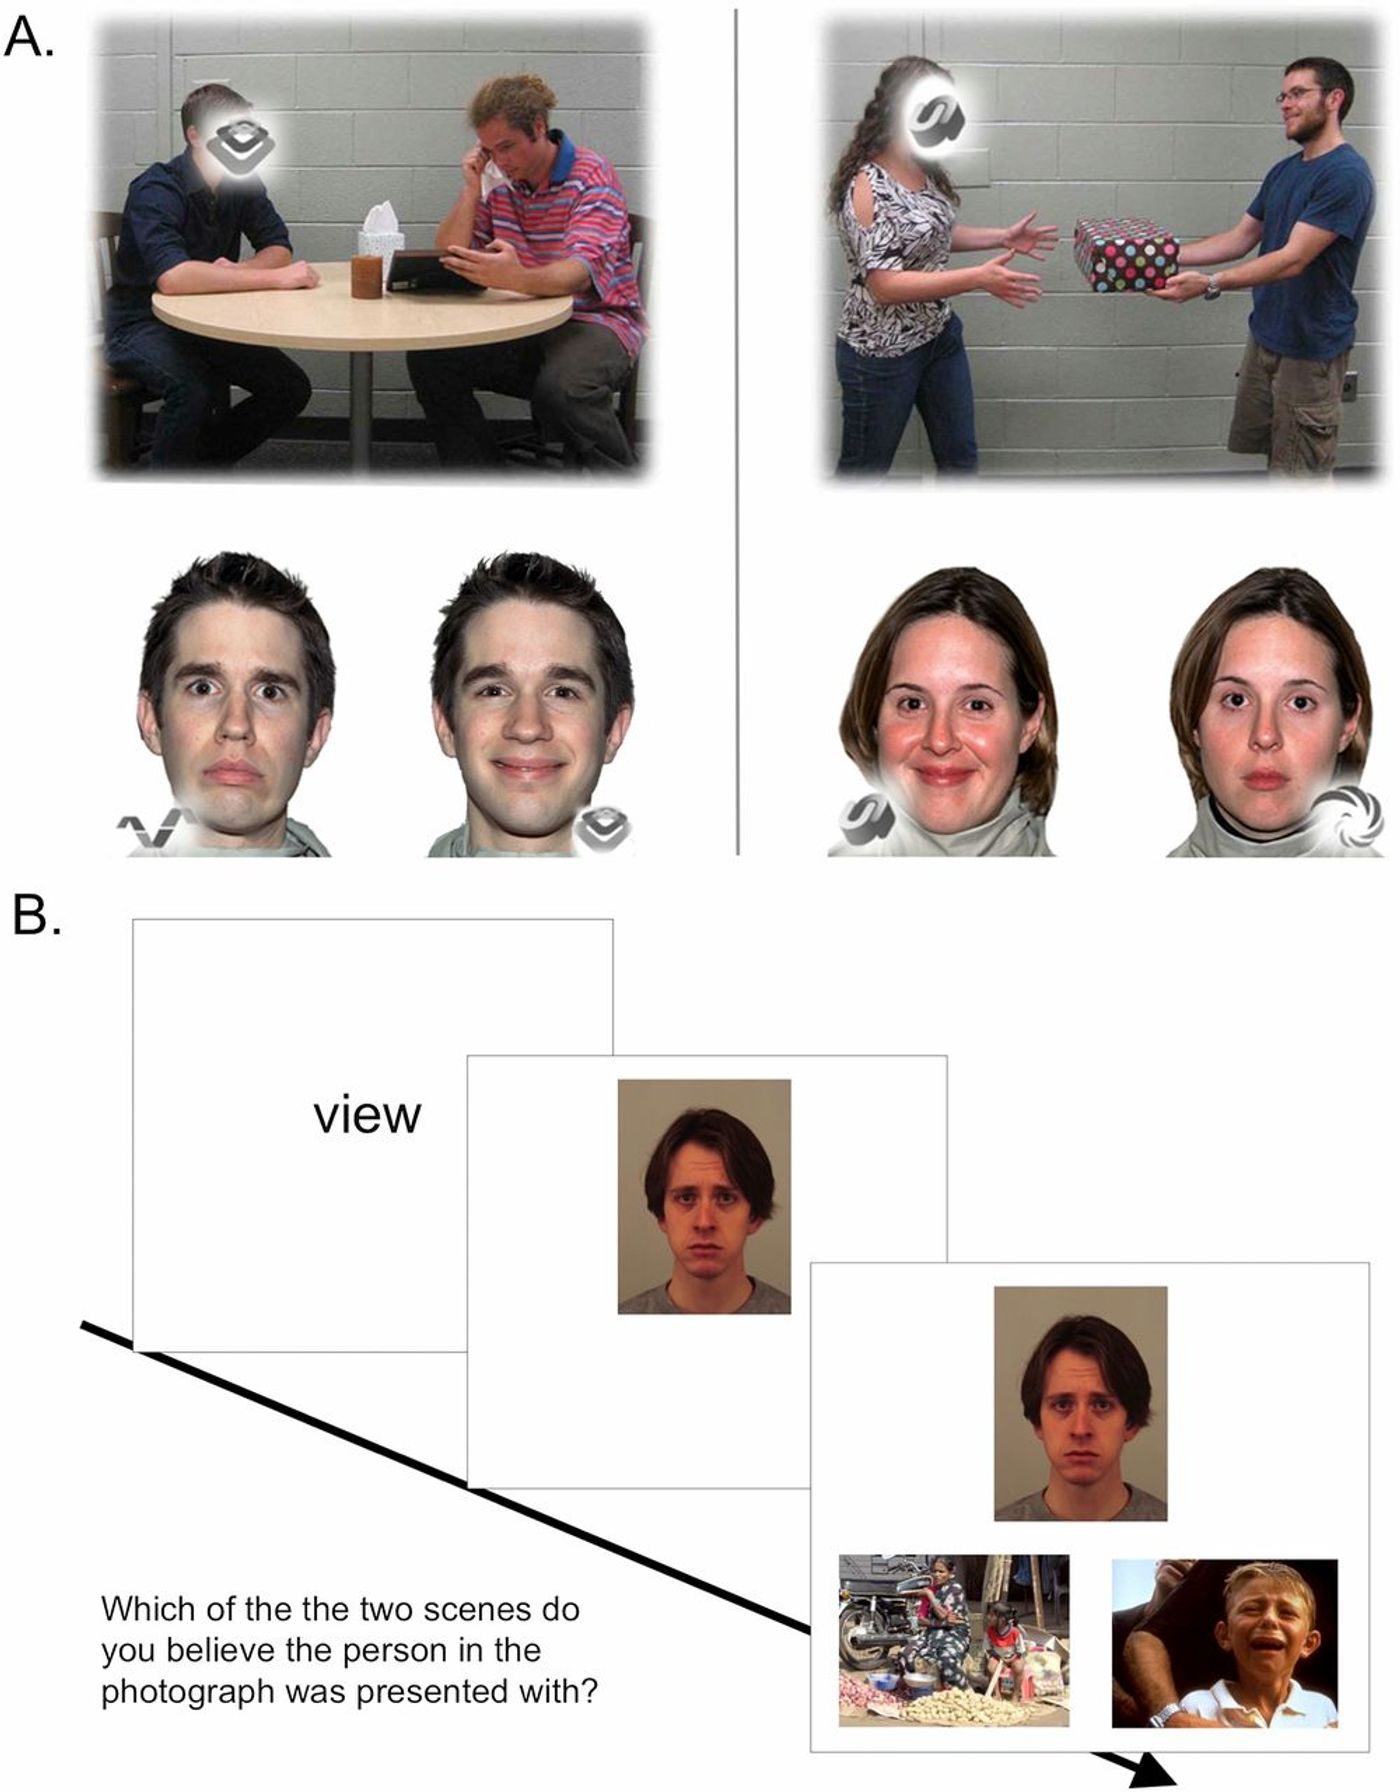 Social-cognitive functional MRI tasks. For emotional perspective-taking (A) participants saw a social interaction within a scene presented on the top of a screen, then decided which of two facial expressions best matches the blank face. During the emotional attribution task (B), participants were decided which of two social scenes they thought another person was reacting to (view). Controls are not described here for clarity. 